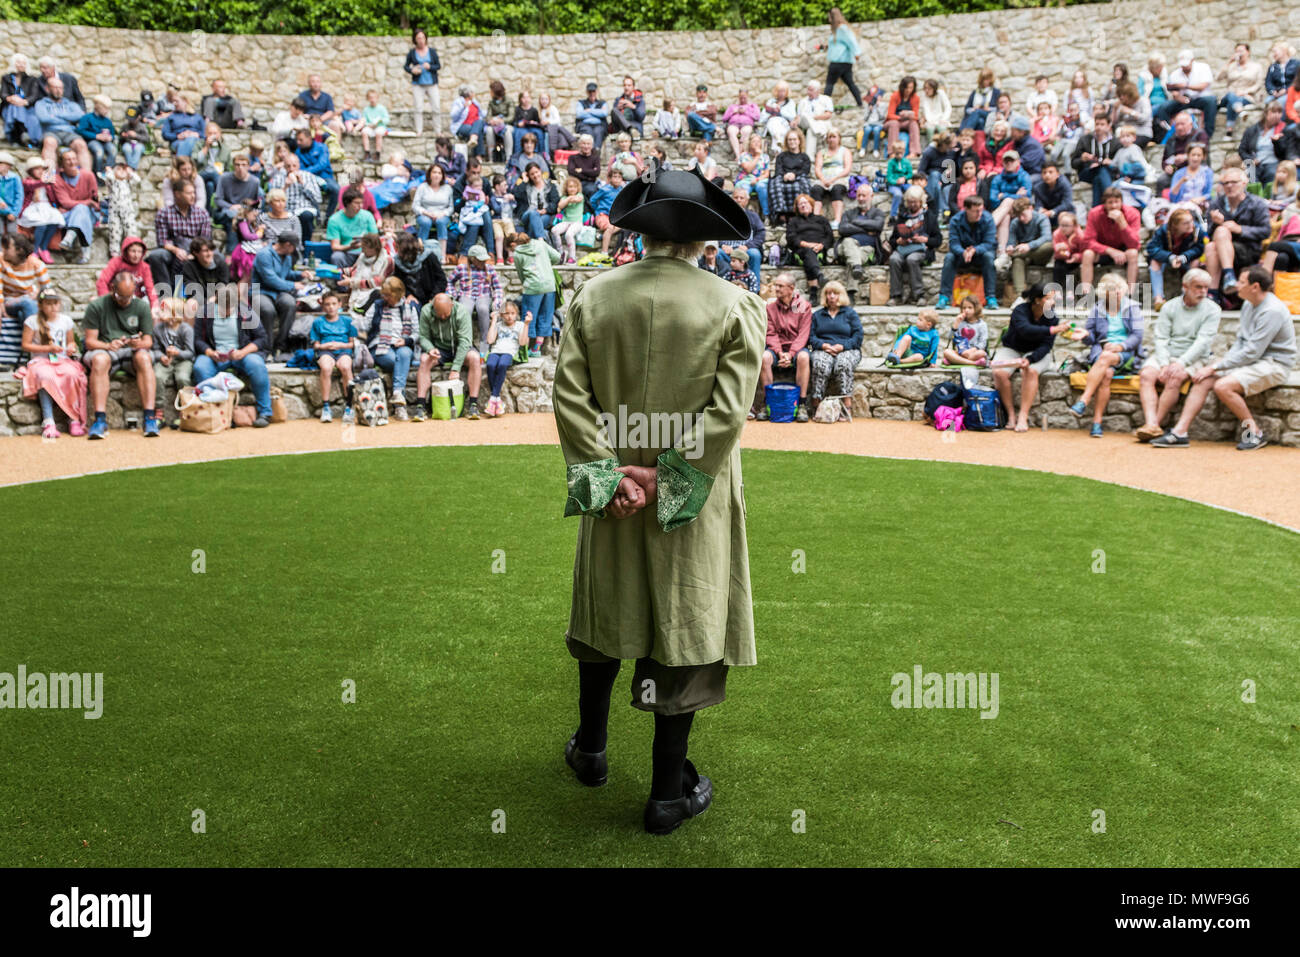 Acting - Gweek Players in a performance of Pirates of Trebah at Trebah Garden Amphitheatre in Cornwall. Stock Photo